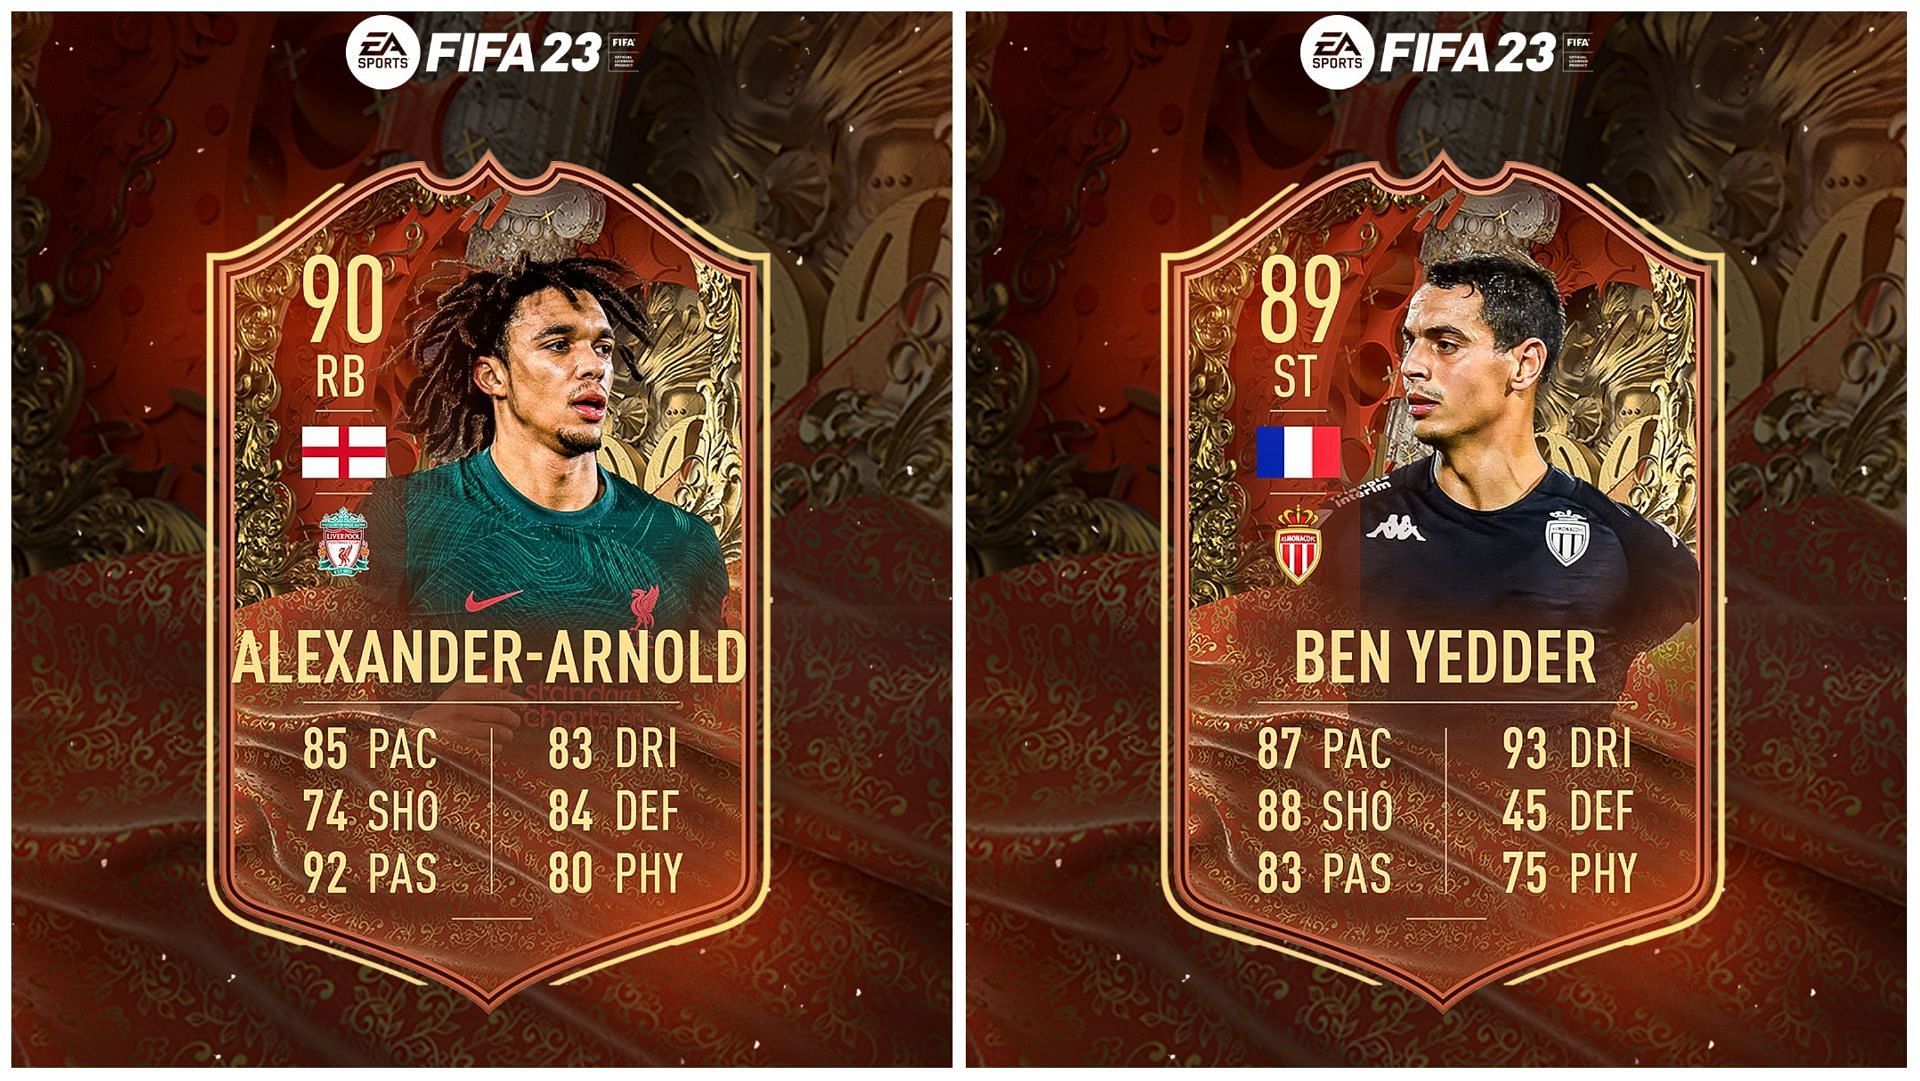 Alexander-Arnold and Ben Yedder are rumored to receive special cards in FIFA 23 (Images via Twitter/FUT Sheriff)